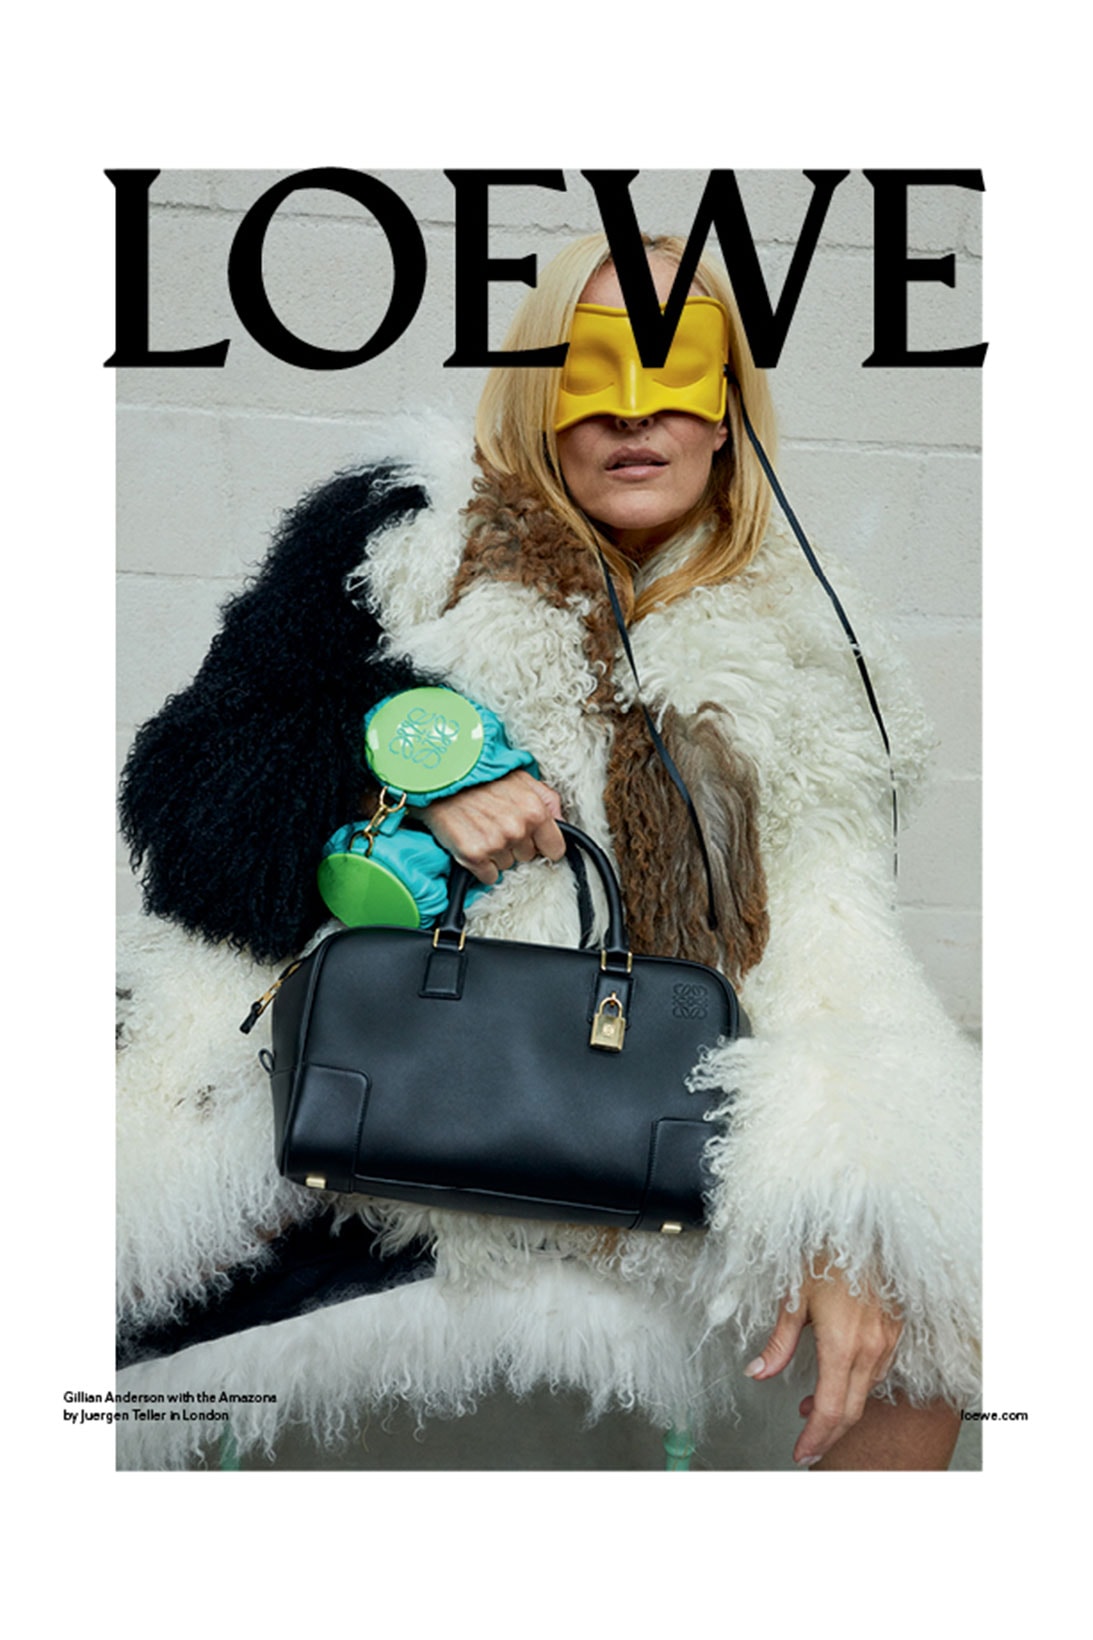 LOEWE - New outerwear and the Goya bag captured at our